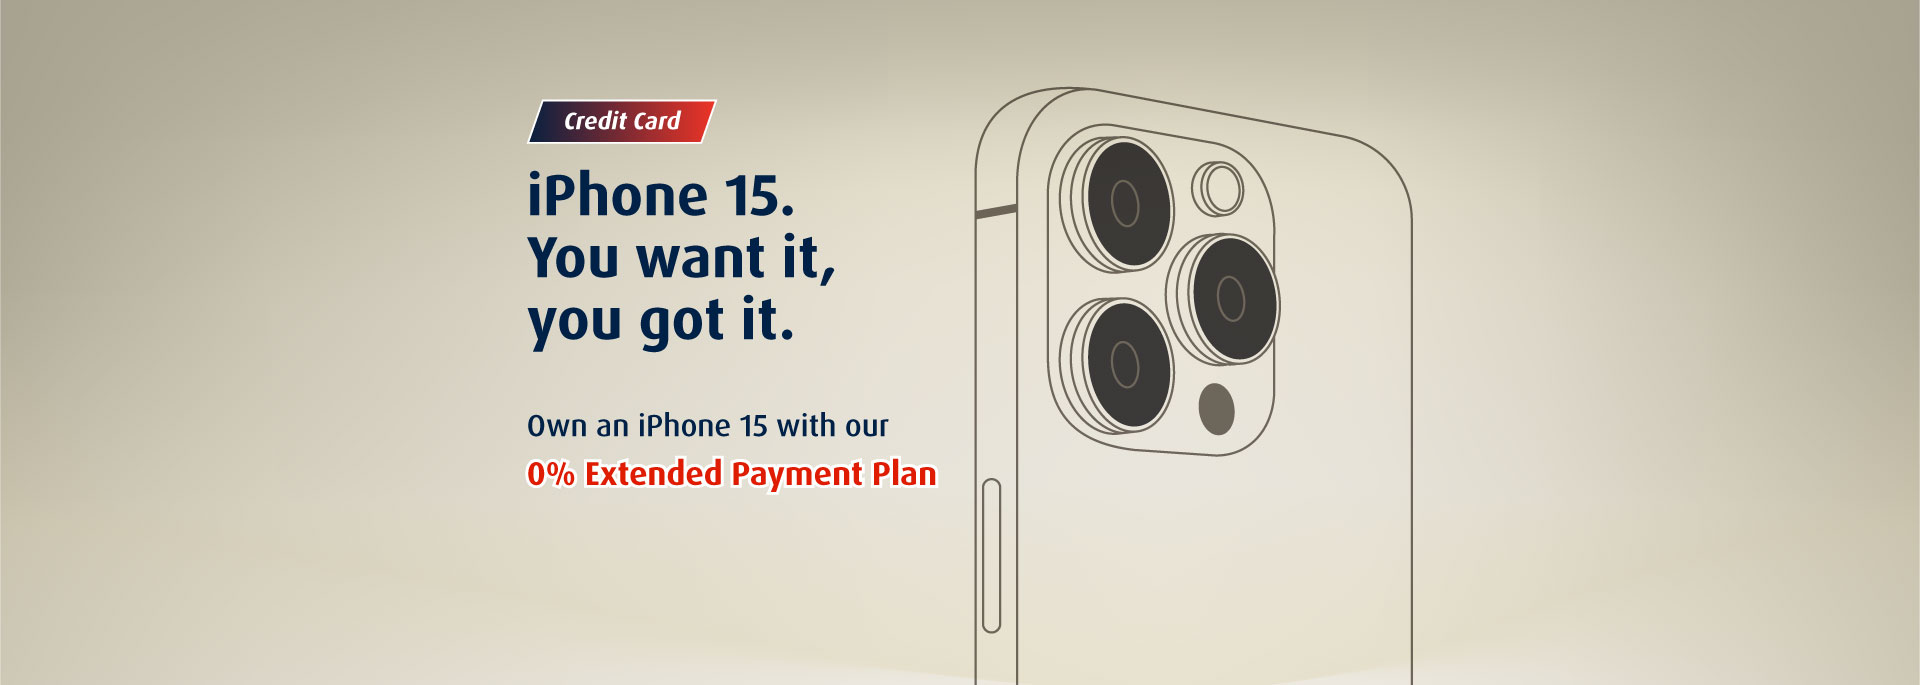 Own an iPhone 15 with our 0% Extended Payment Plan